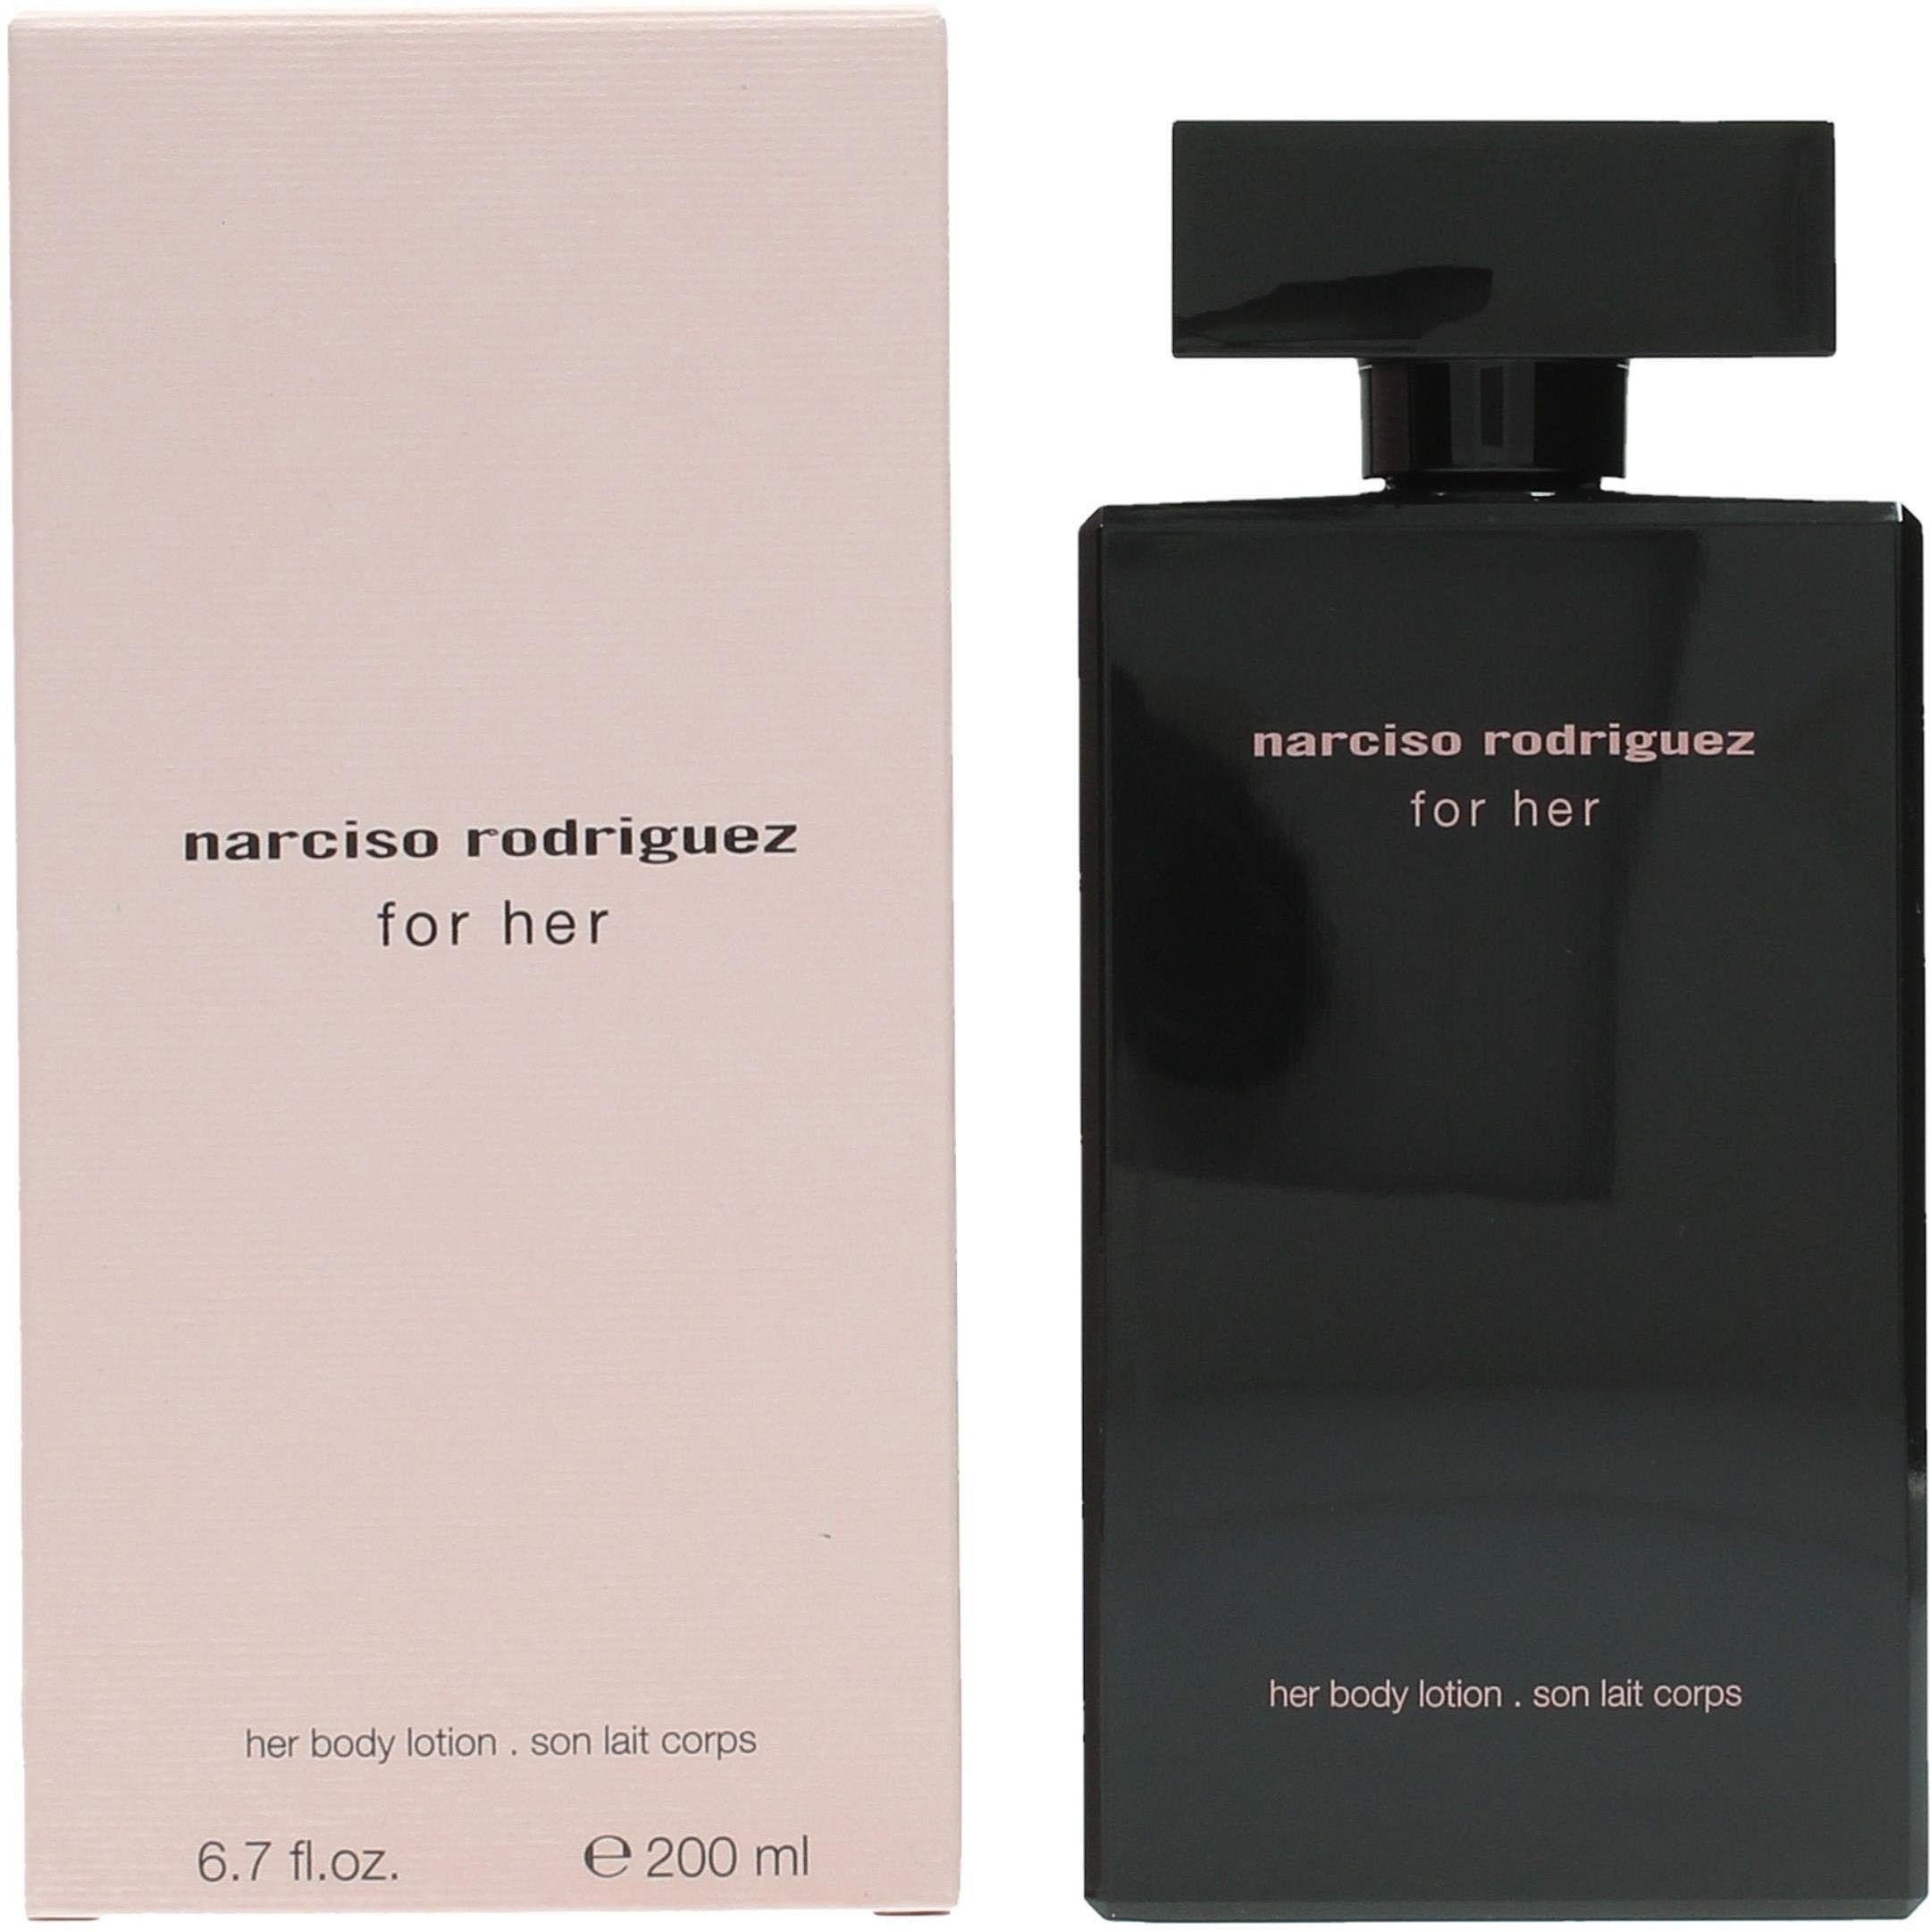 Her Bodylotion rodriguez For narciso